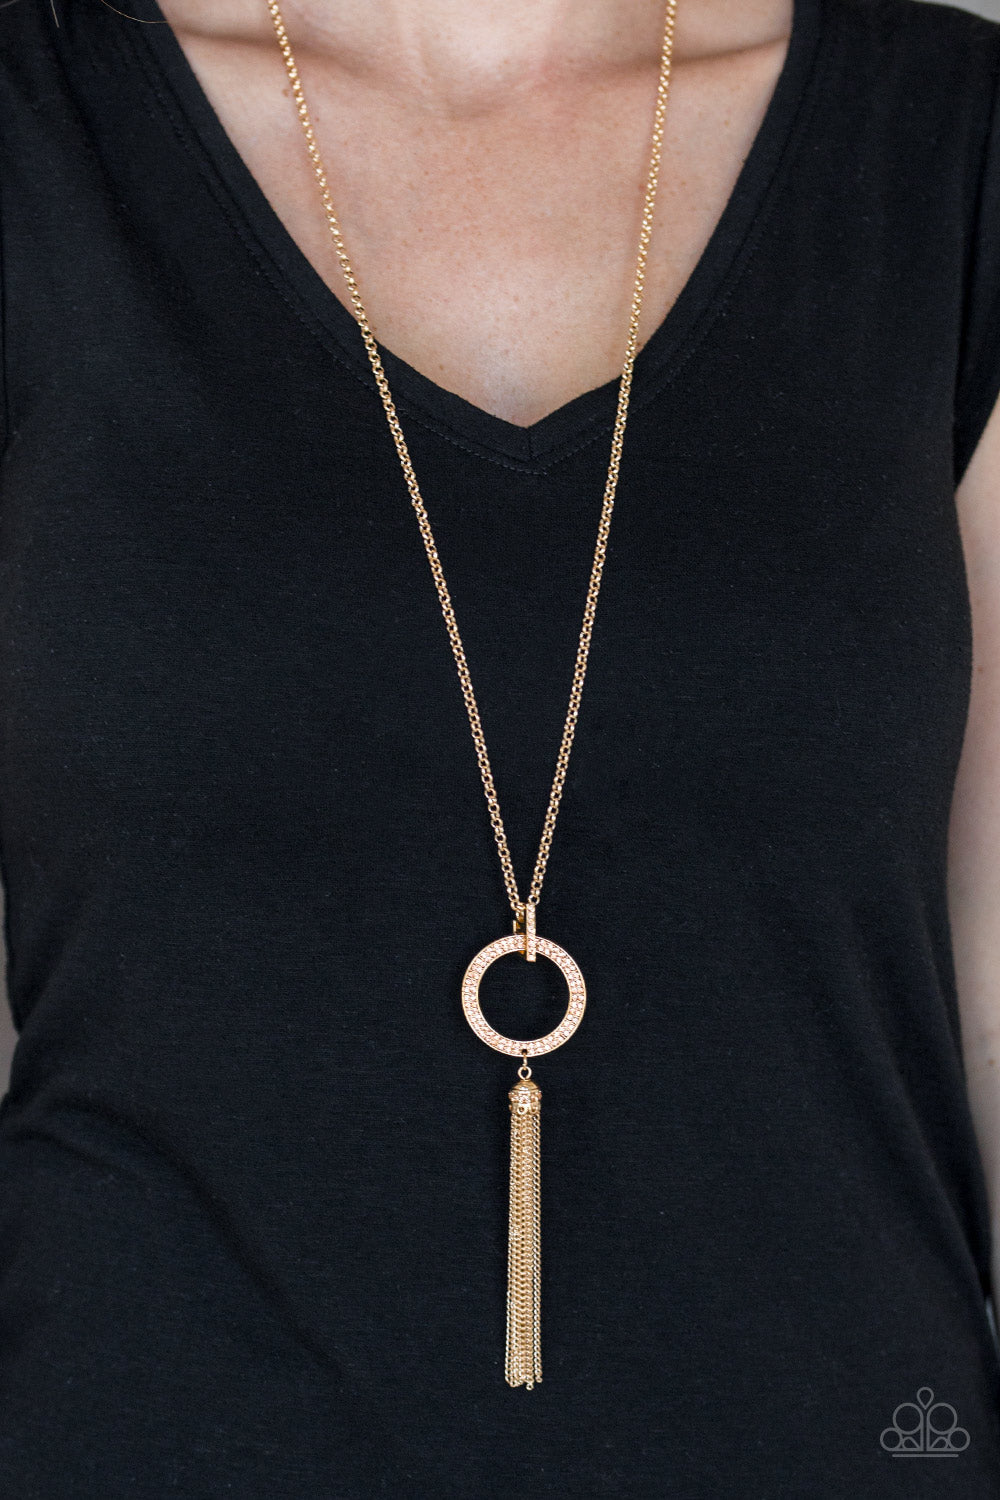 Straight To The Top Necklaces - Gold